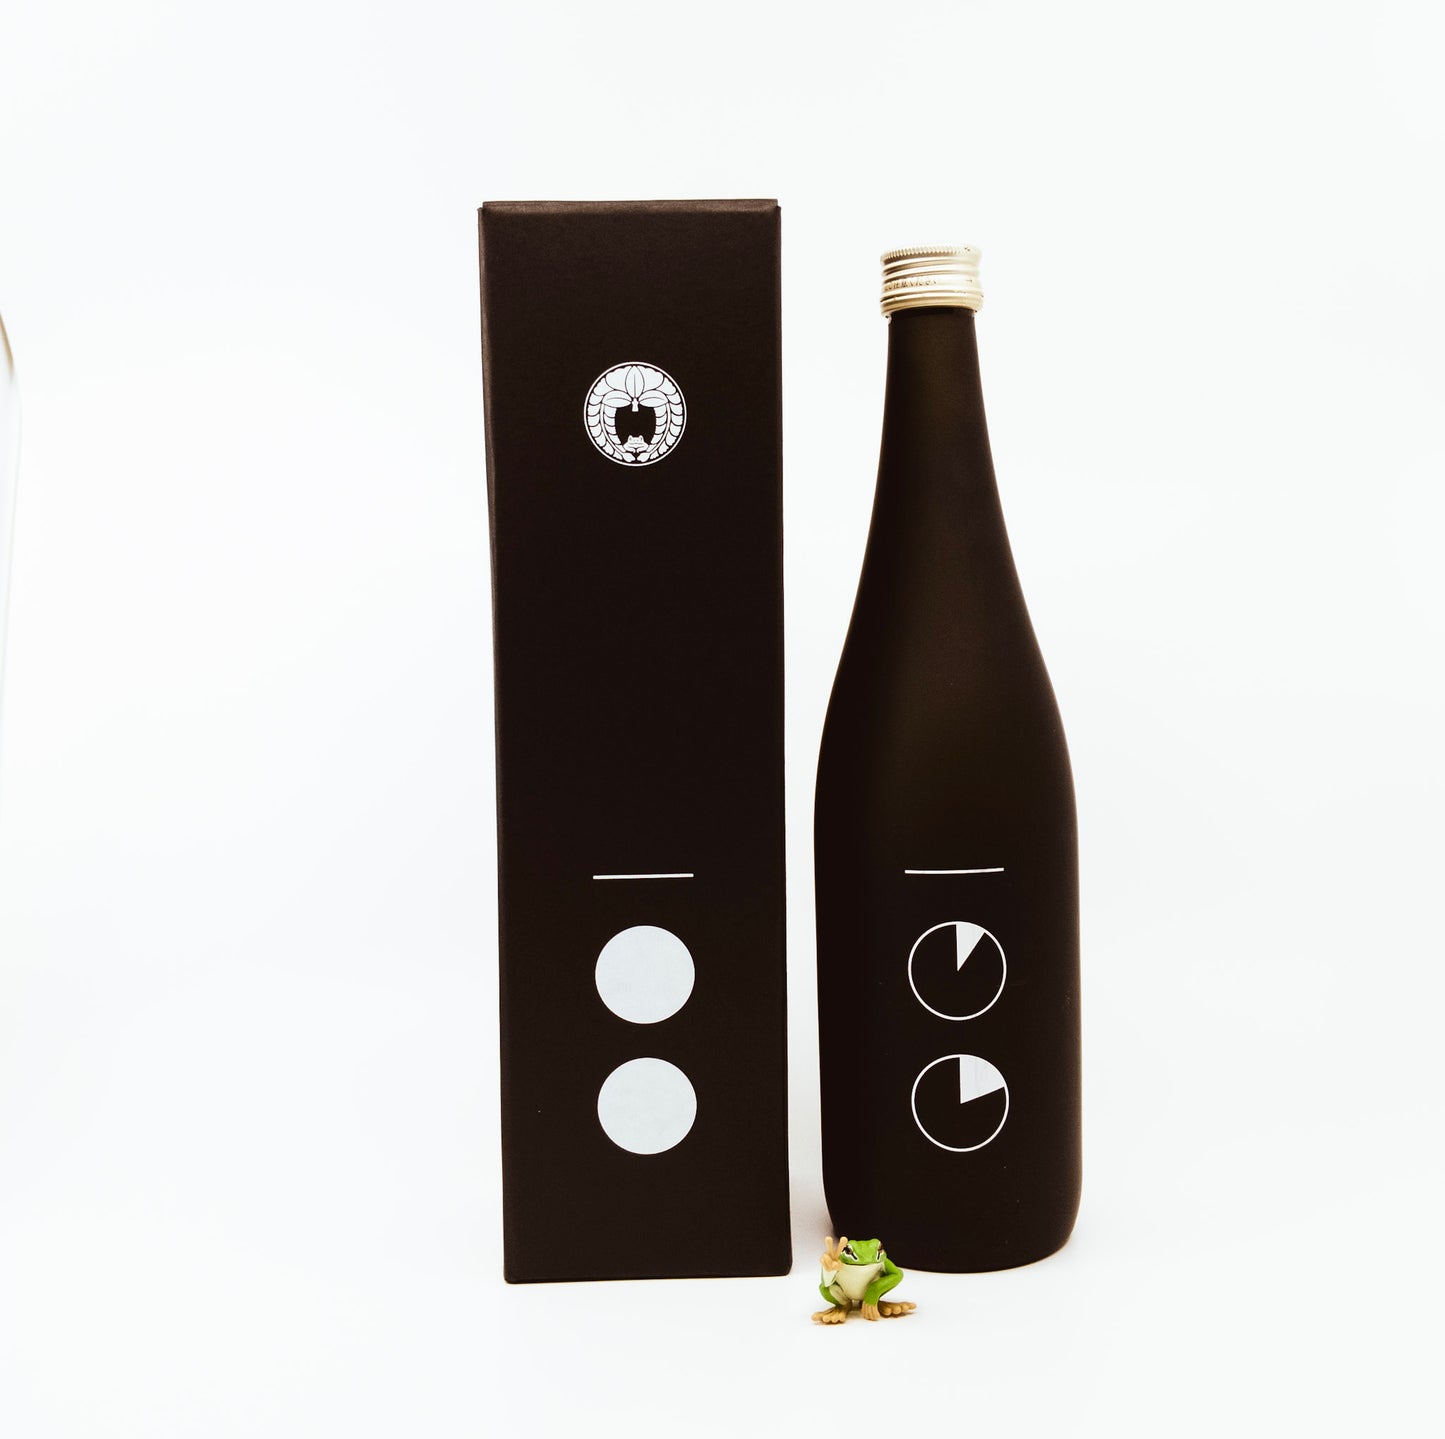 black bottle next to box and frog figurine